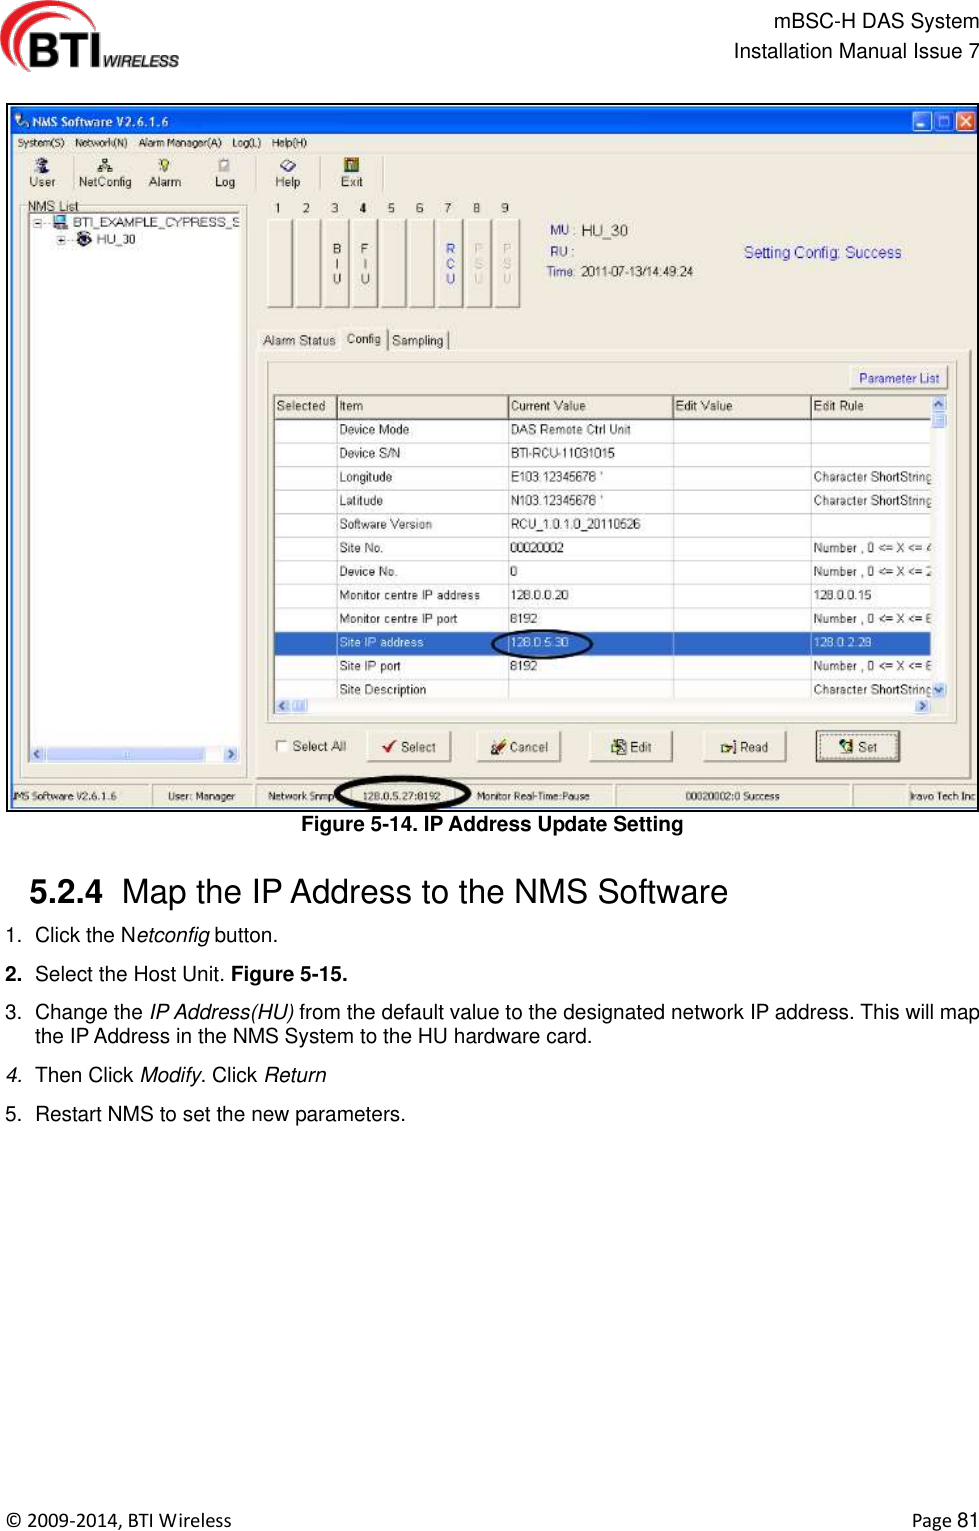                                                   mBSC-H DAS System   Installation Manual Issue 7  ©  2009-2014, BTI Wireless    Page 81  Figure 5-14. IP Address Update Setting   5.2.4  Map the IP Address to the NMS Software 1.  Click the Netconfig button. 2. Select the Host Unit. Figure 5-15. 3.  Change the IP Address(HU) from the default value to the designated network IP address. This will map the IP Address in the NMS System to the HU hardware card. 4. Then Click Modify. Click Return 5.  Restart NMS to set the new parameters.    